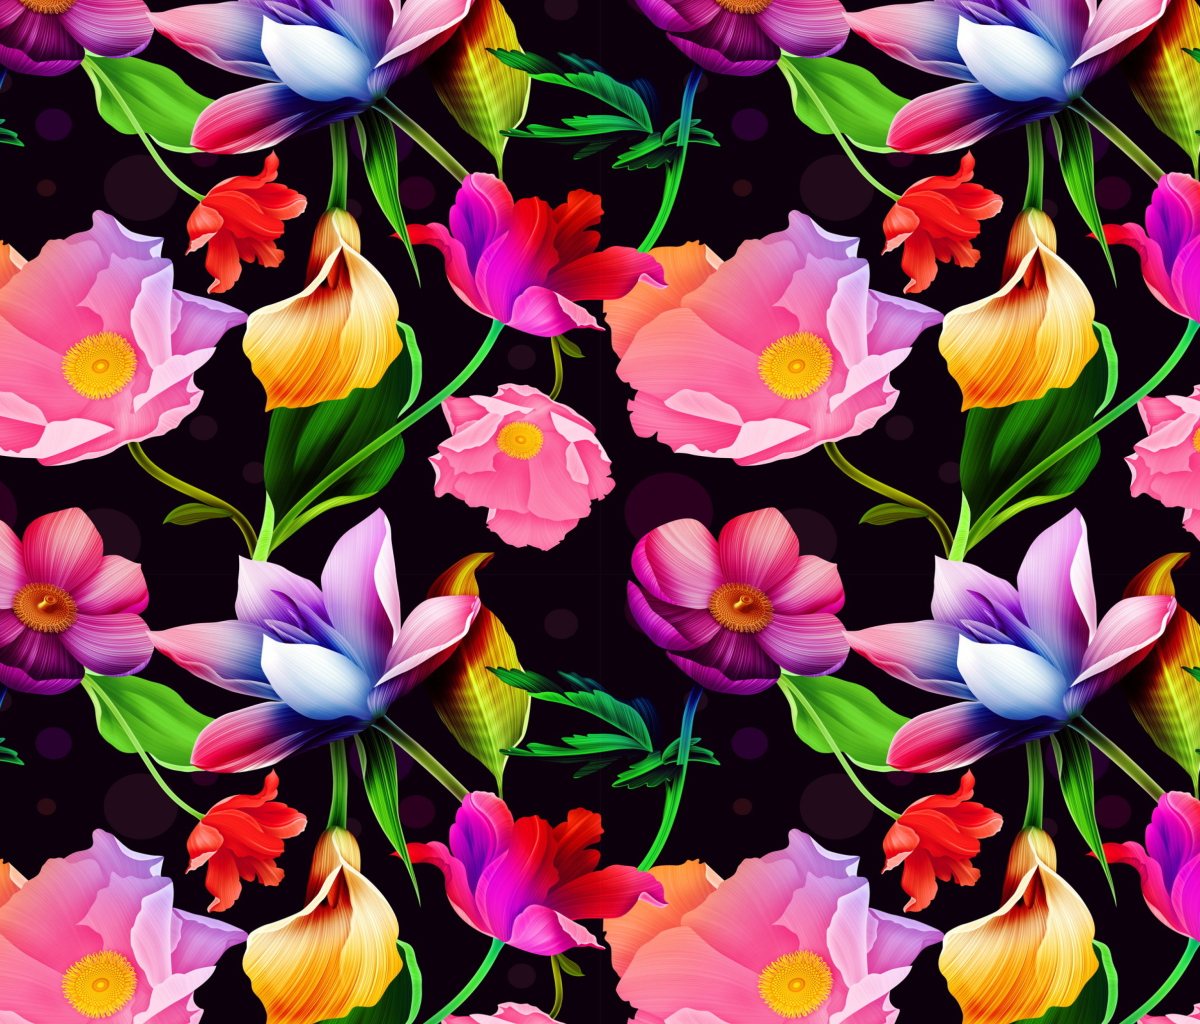 Colorful Flowers wallpaper 1200x1024